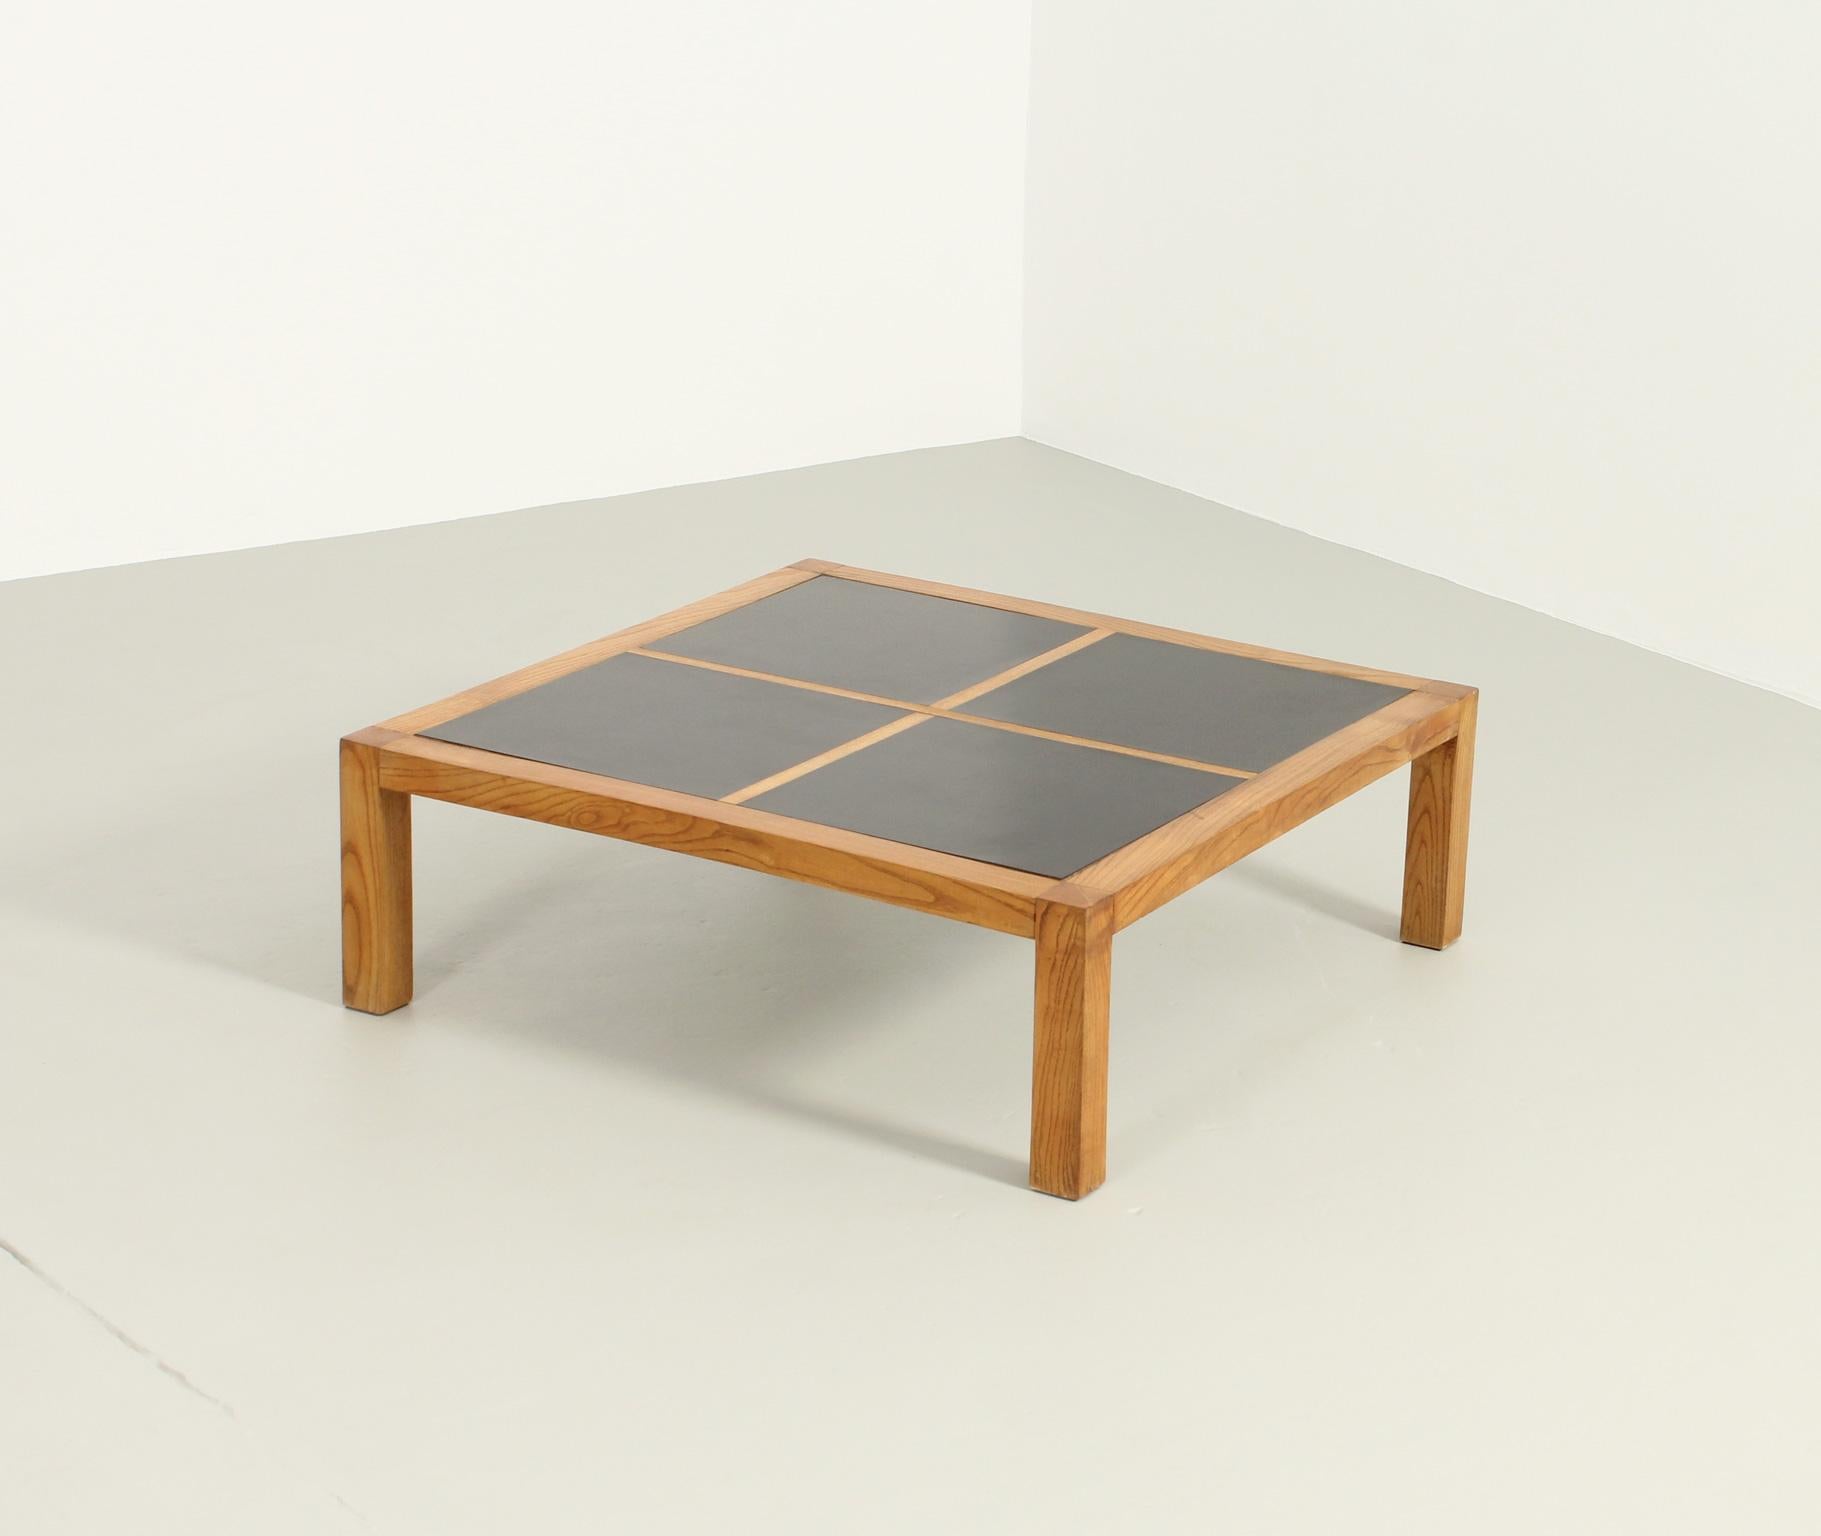 Coffee or Center Table in Pine Wood and Laminate, France, 1970's For Sale 7